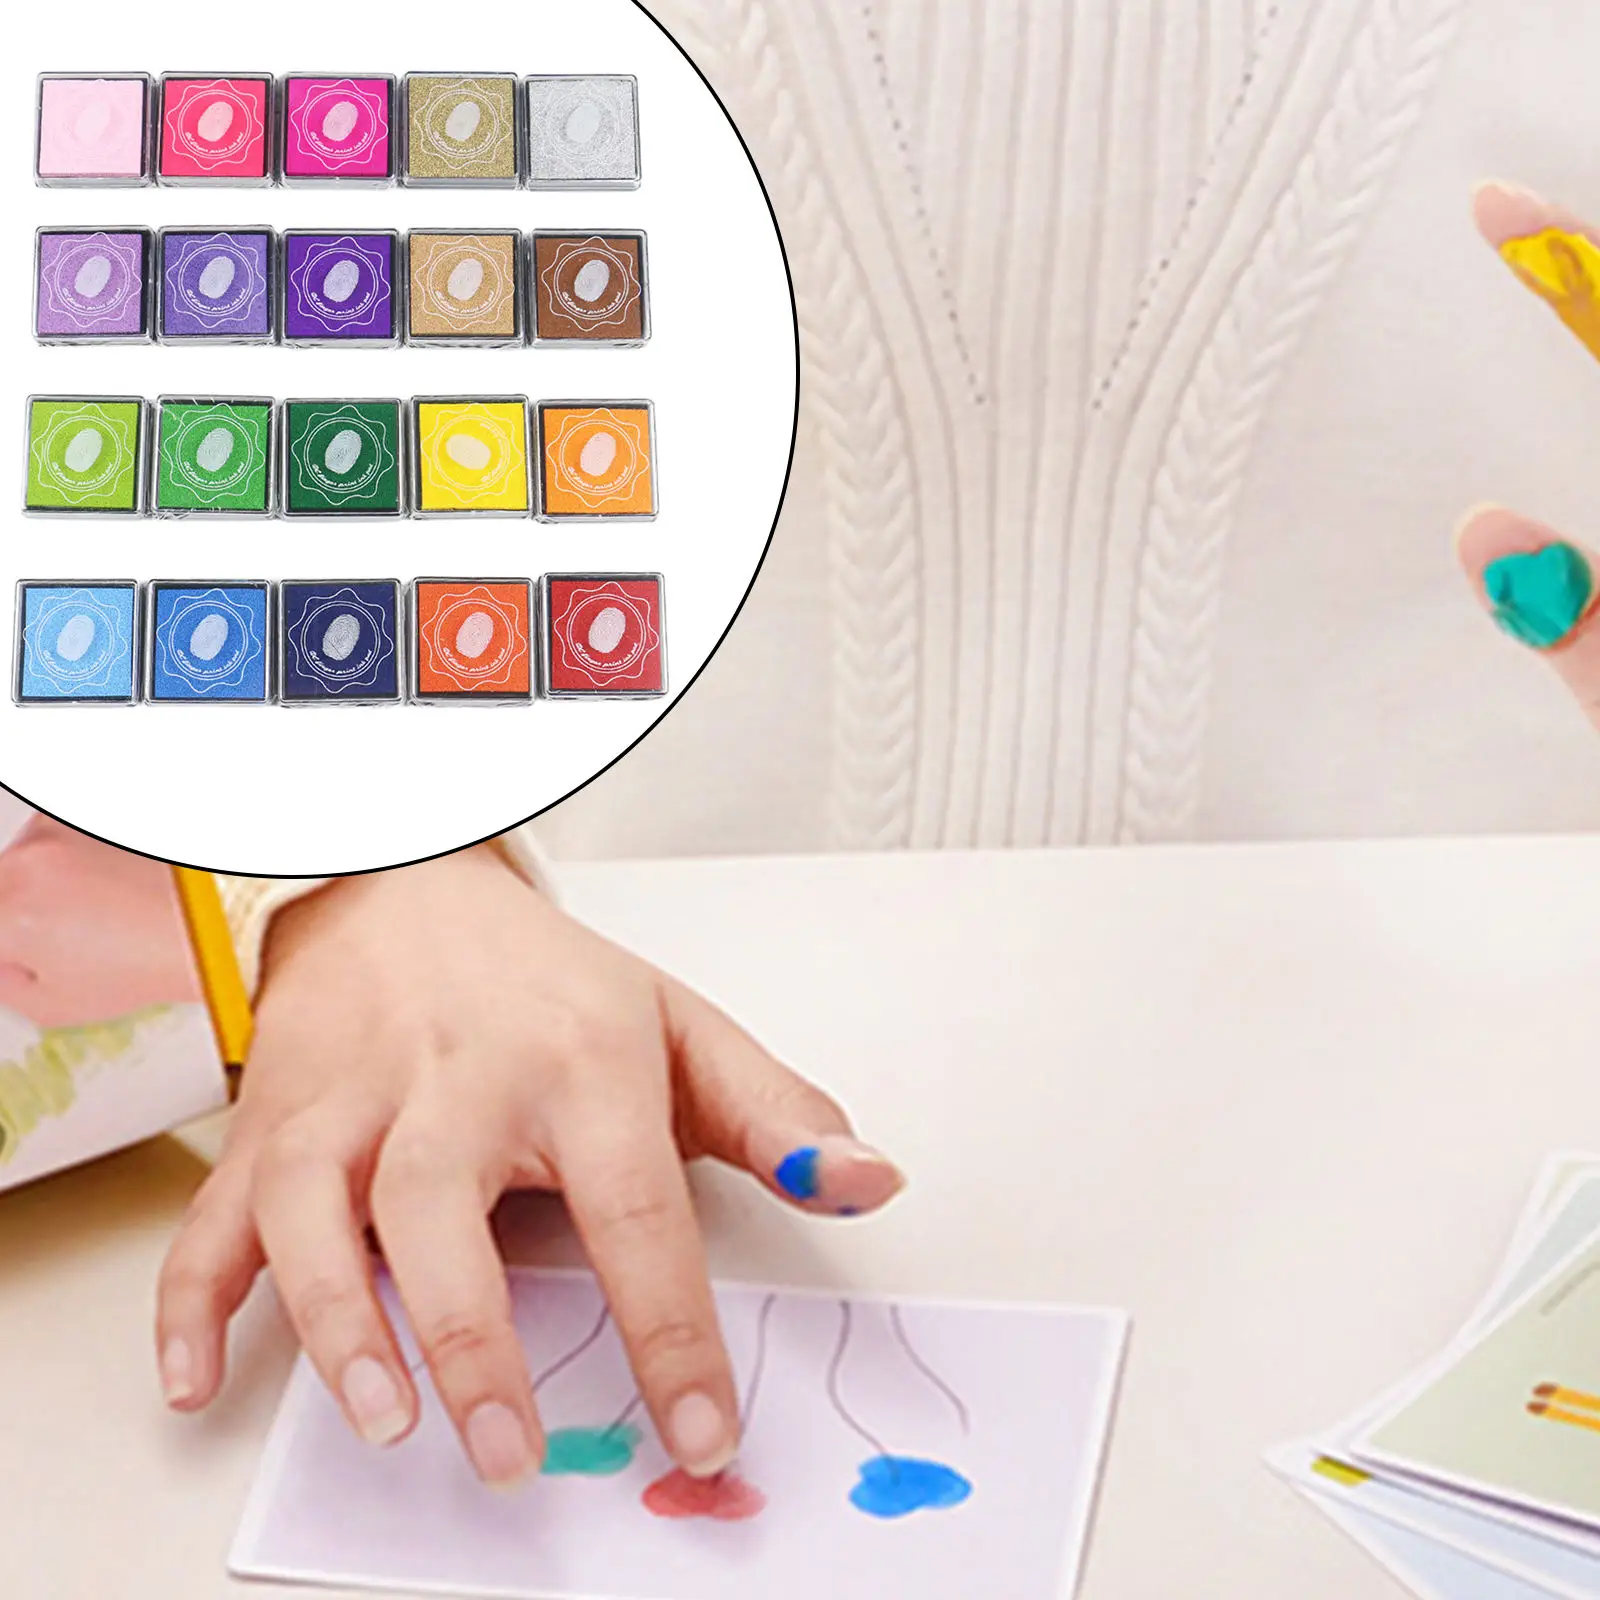 Finger Washable Ink Pads for Kids, 20 Pack Craft Ink Pad for Rubber Stamps Paper Wood Fabric